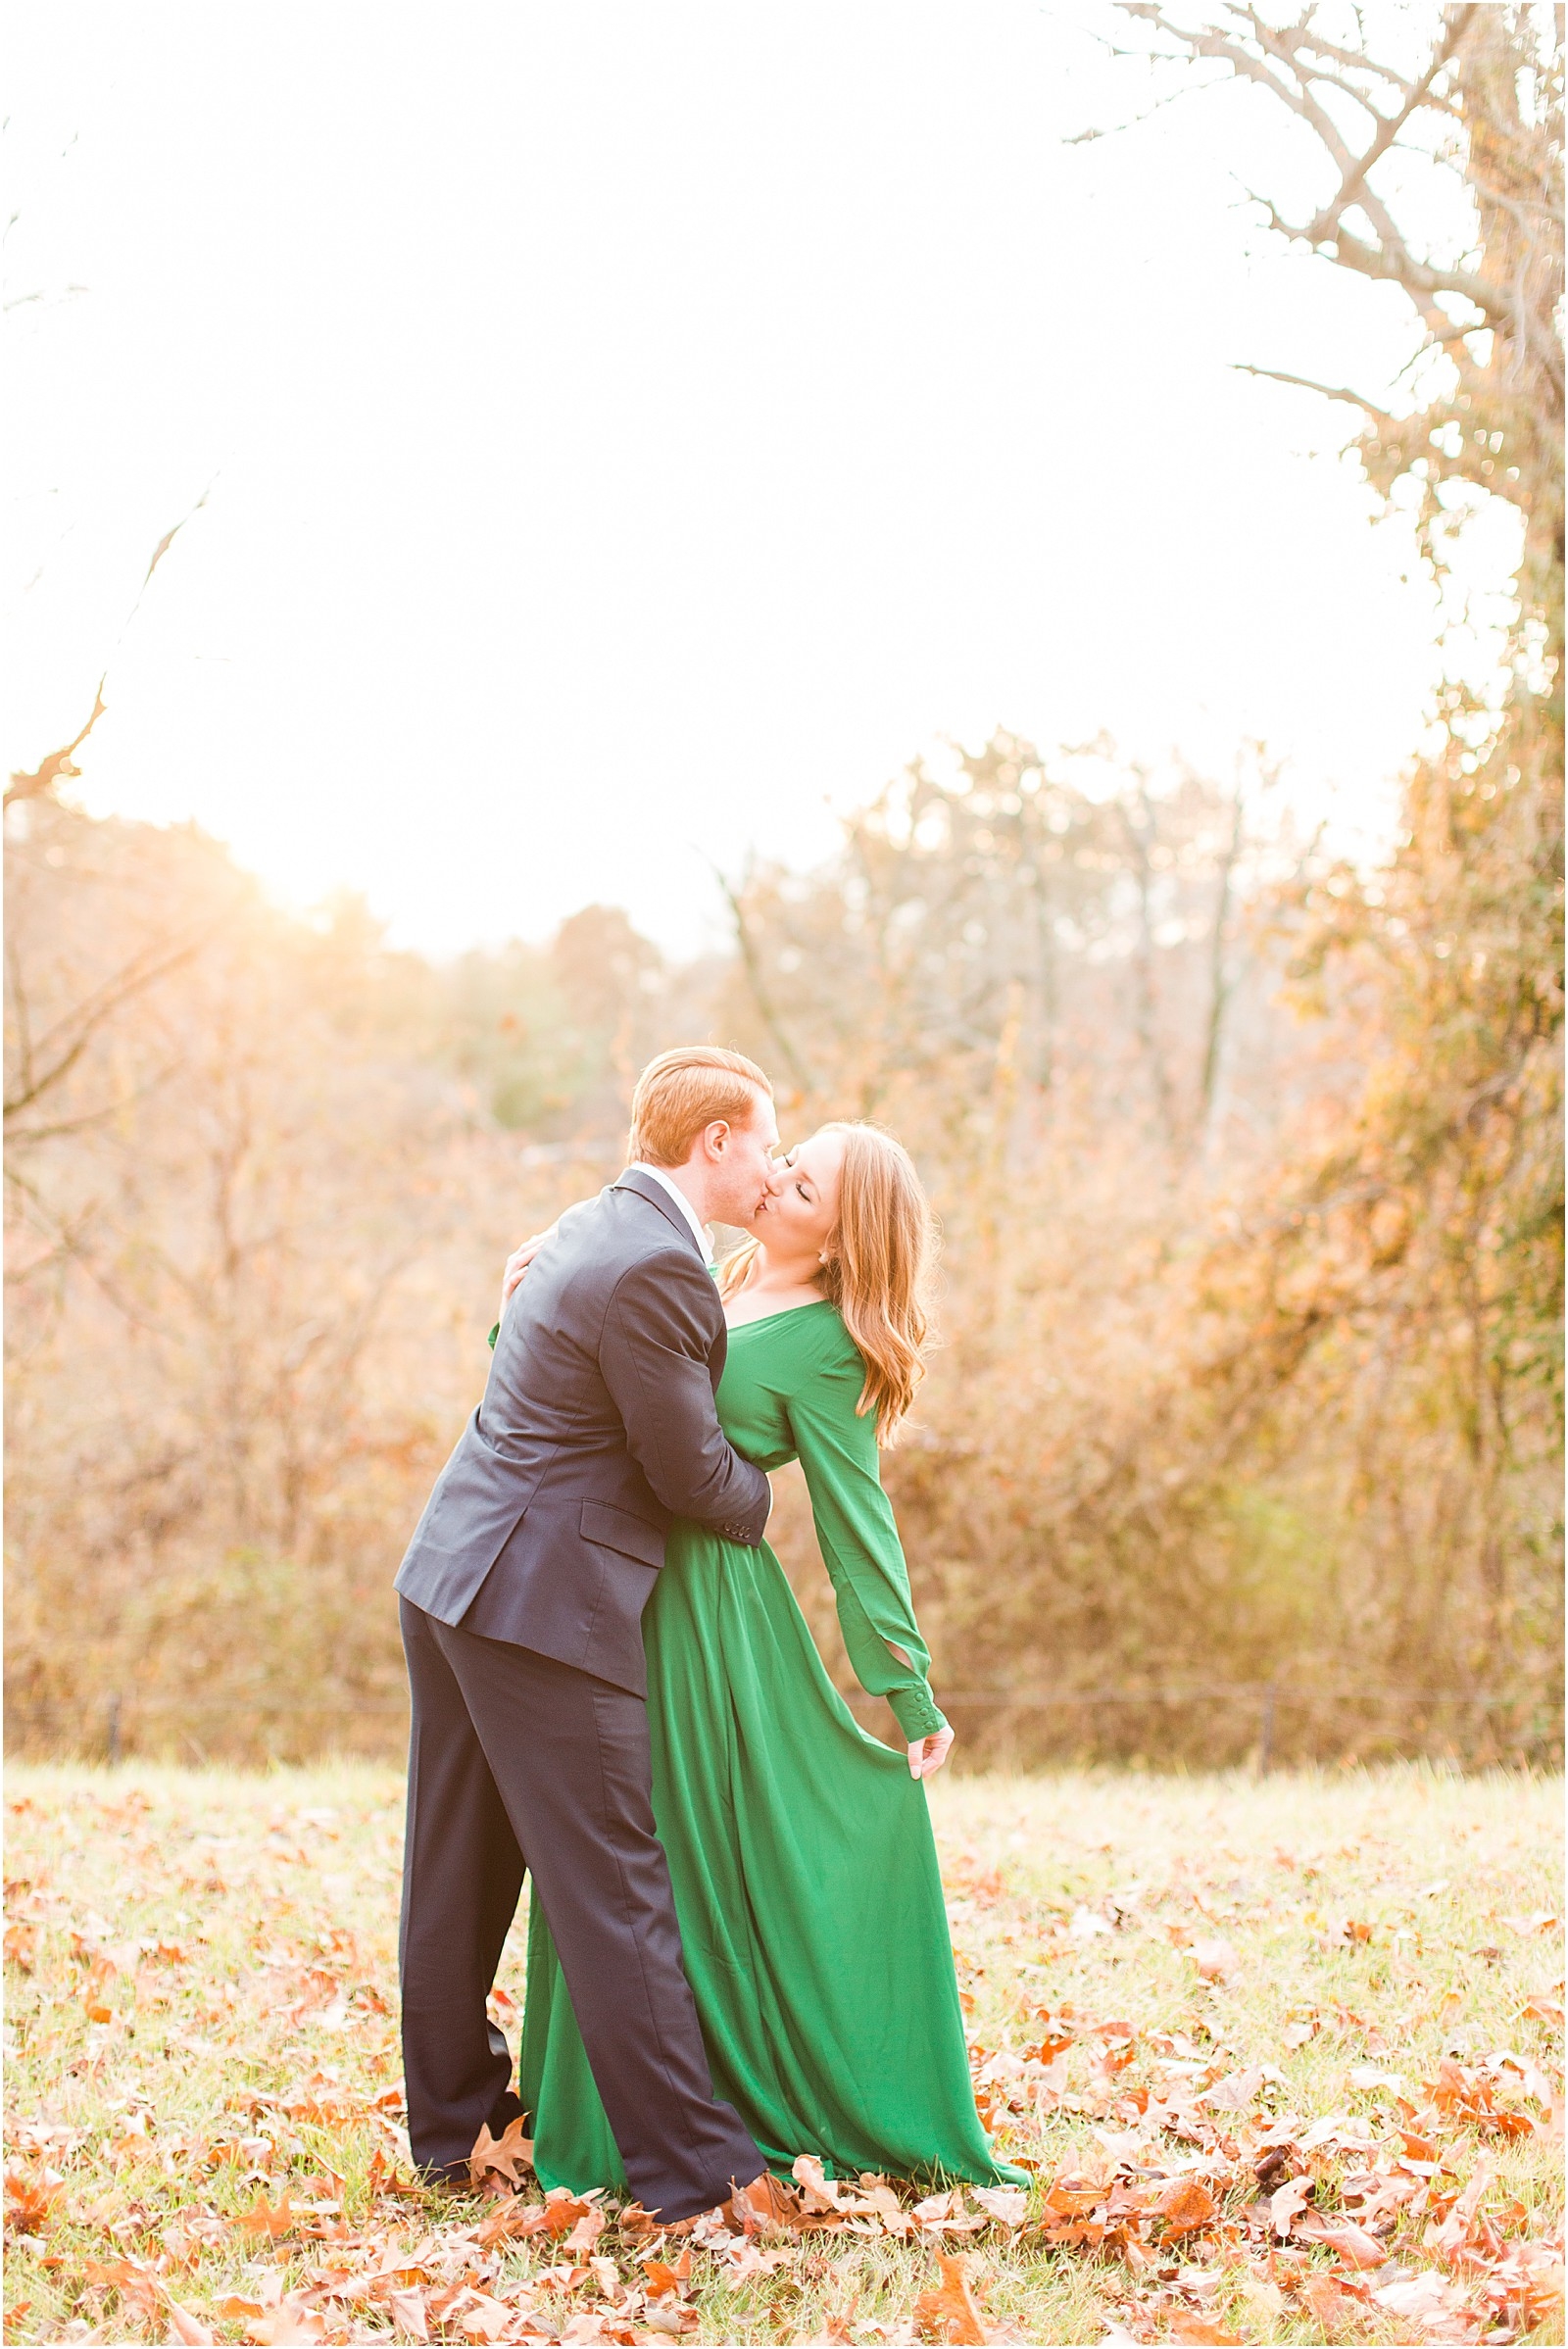 A Mesker Park Zoo Engagement Session | Jennah and Steve | Bret and Brandie Photography028.jpg